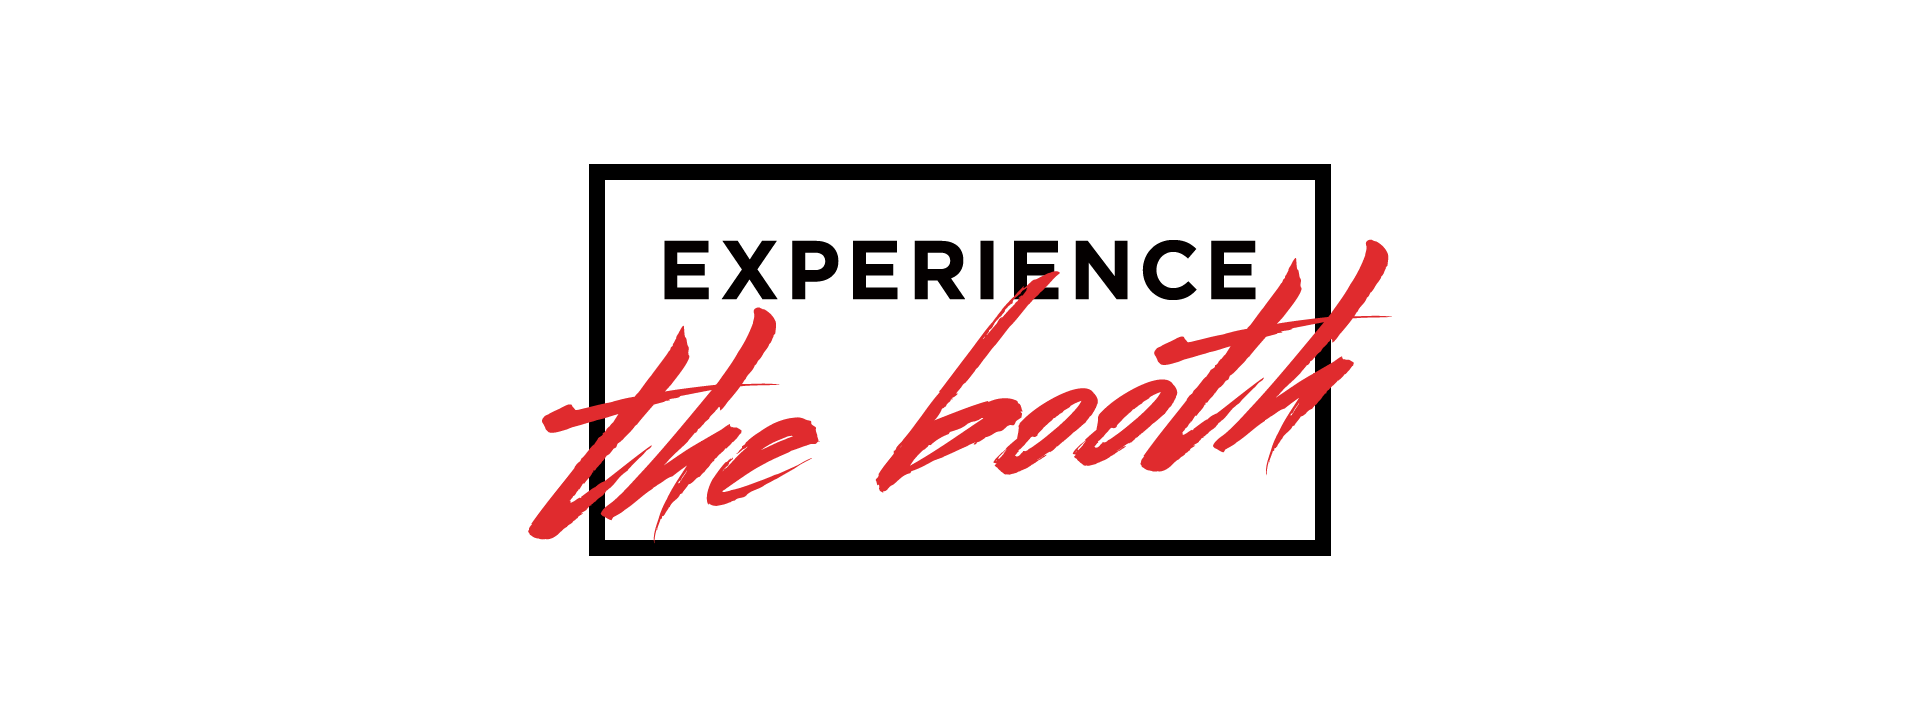 Experience the Booth